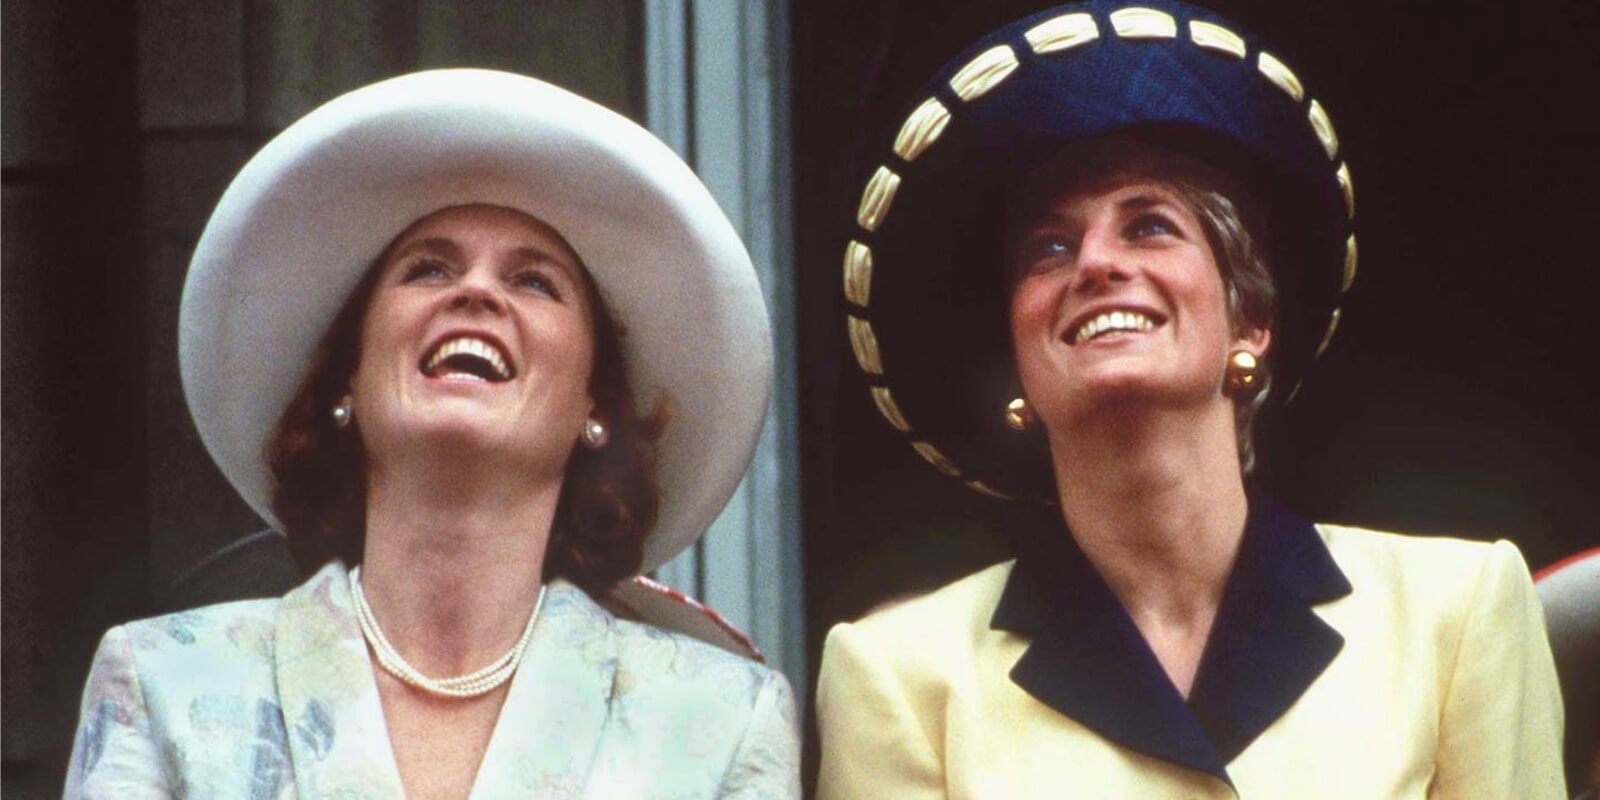 Sarah Ferguson and Princess Diana were not only sisters-in-law but friends within the royal family.